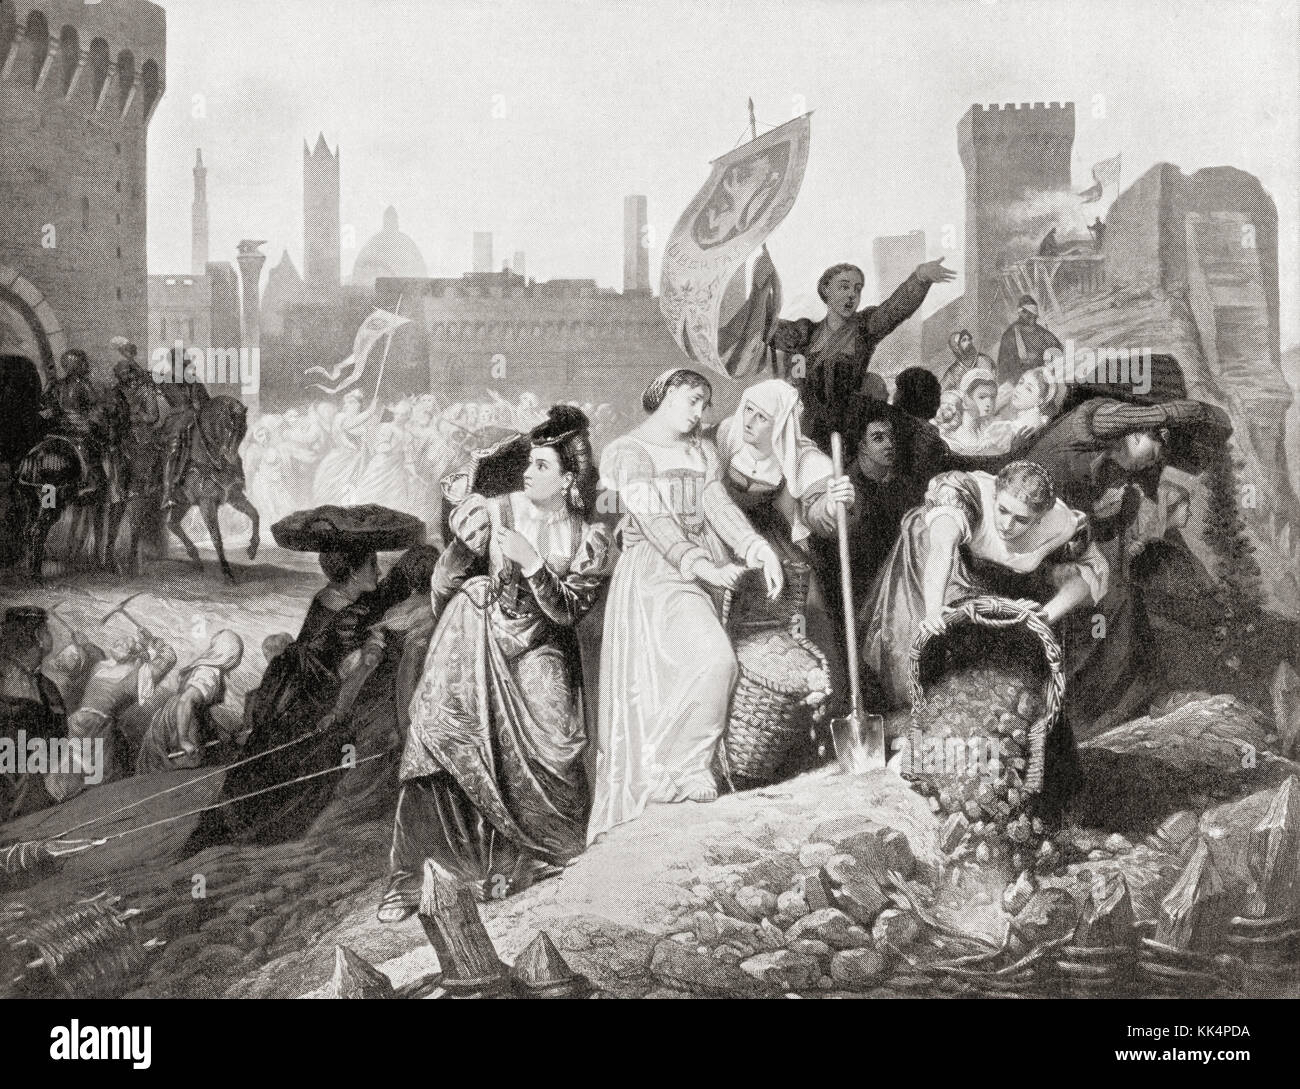 The women of Siena, Italy aid in defending their city against Cosimo I de' Medici and the Spanish troops of Charles V, 1555.  From Hutchinson's History of the Nations, published 1915. Stock Photo